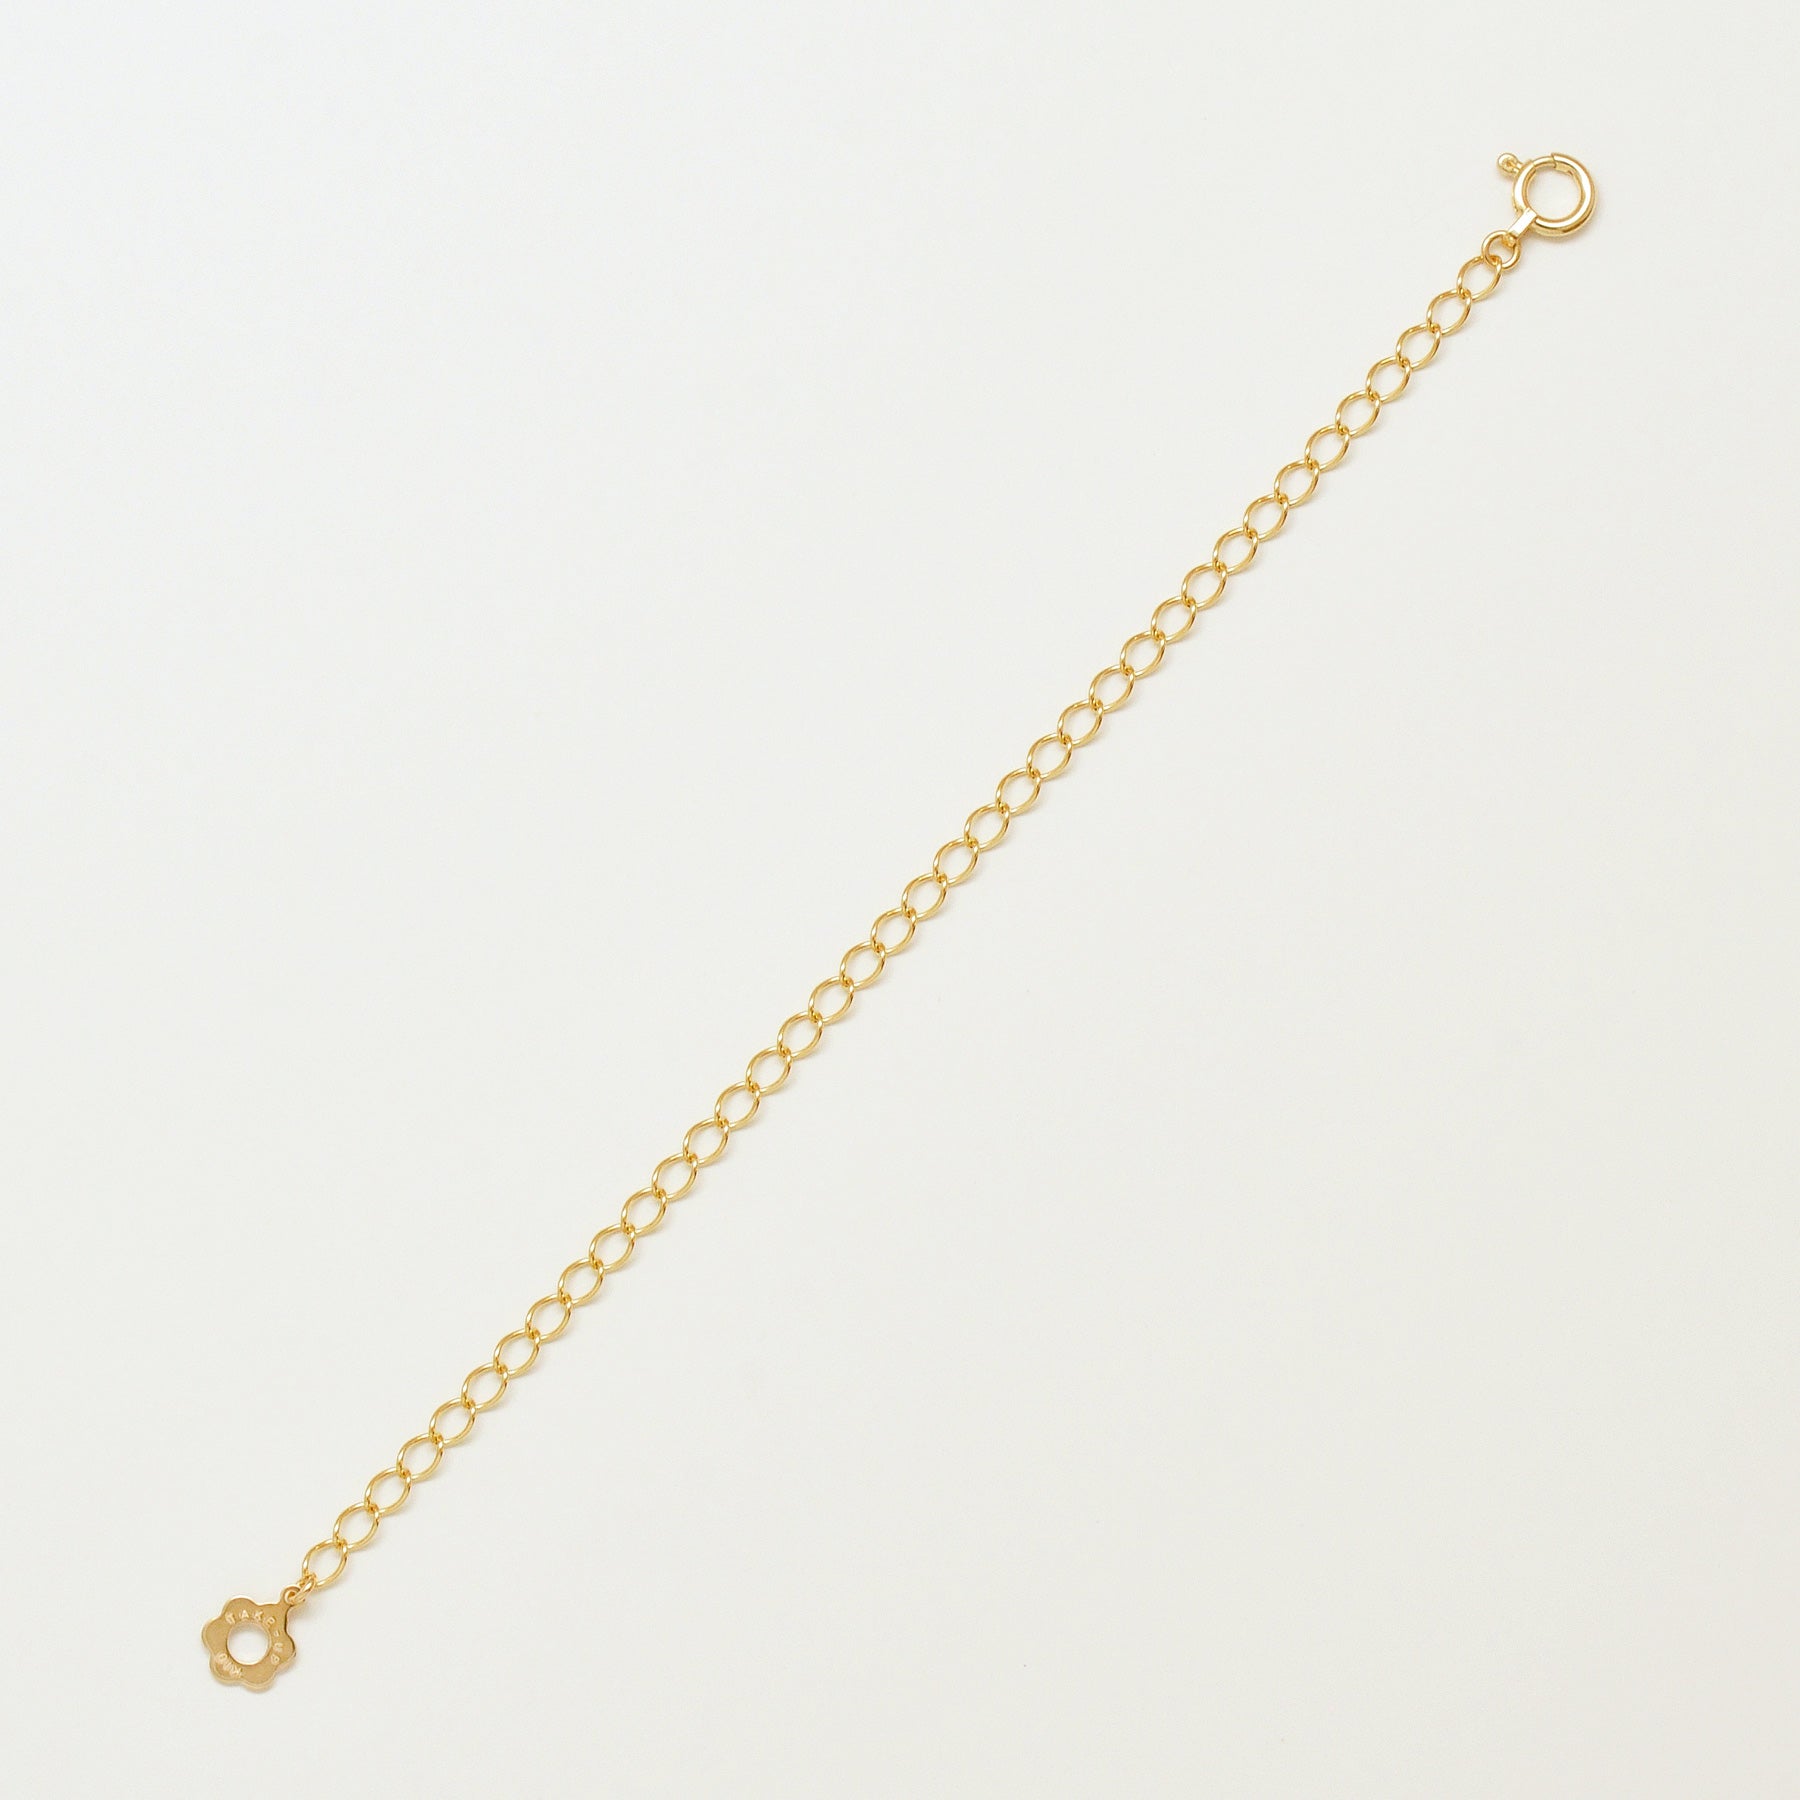 10K Long Chain Adjuster 10cm (Yellow Gold) - Product Image